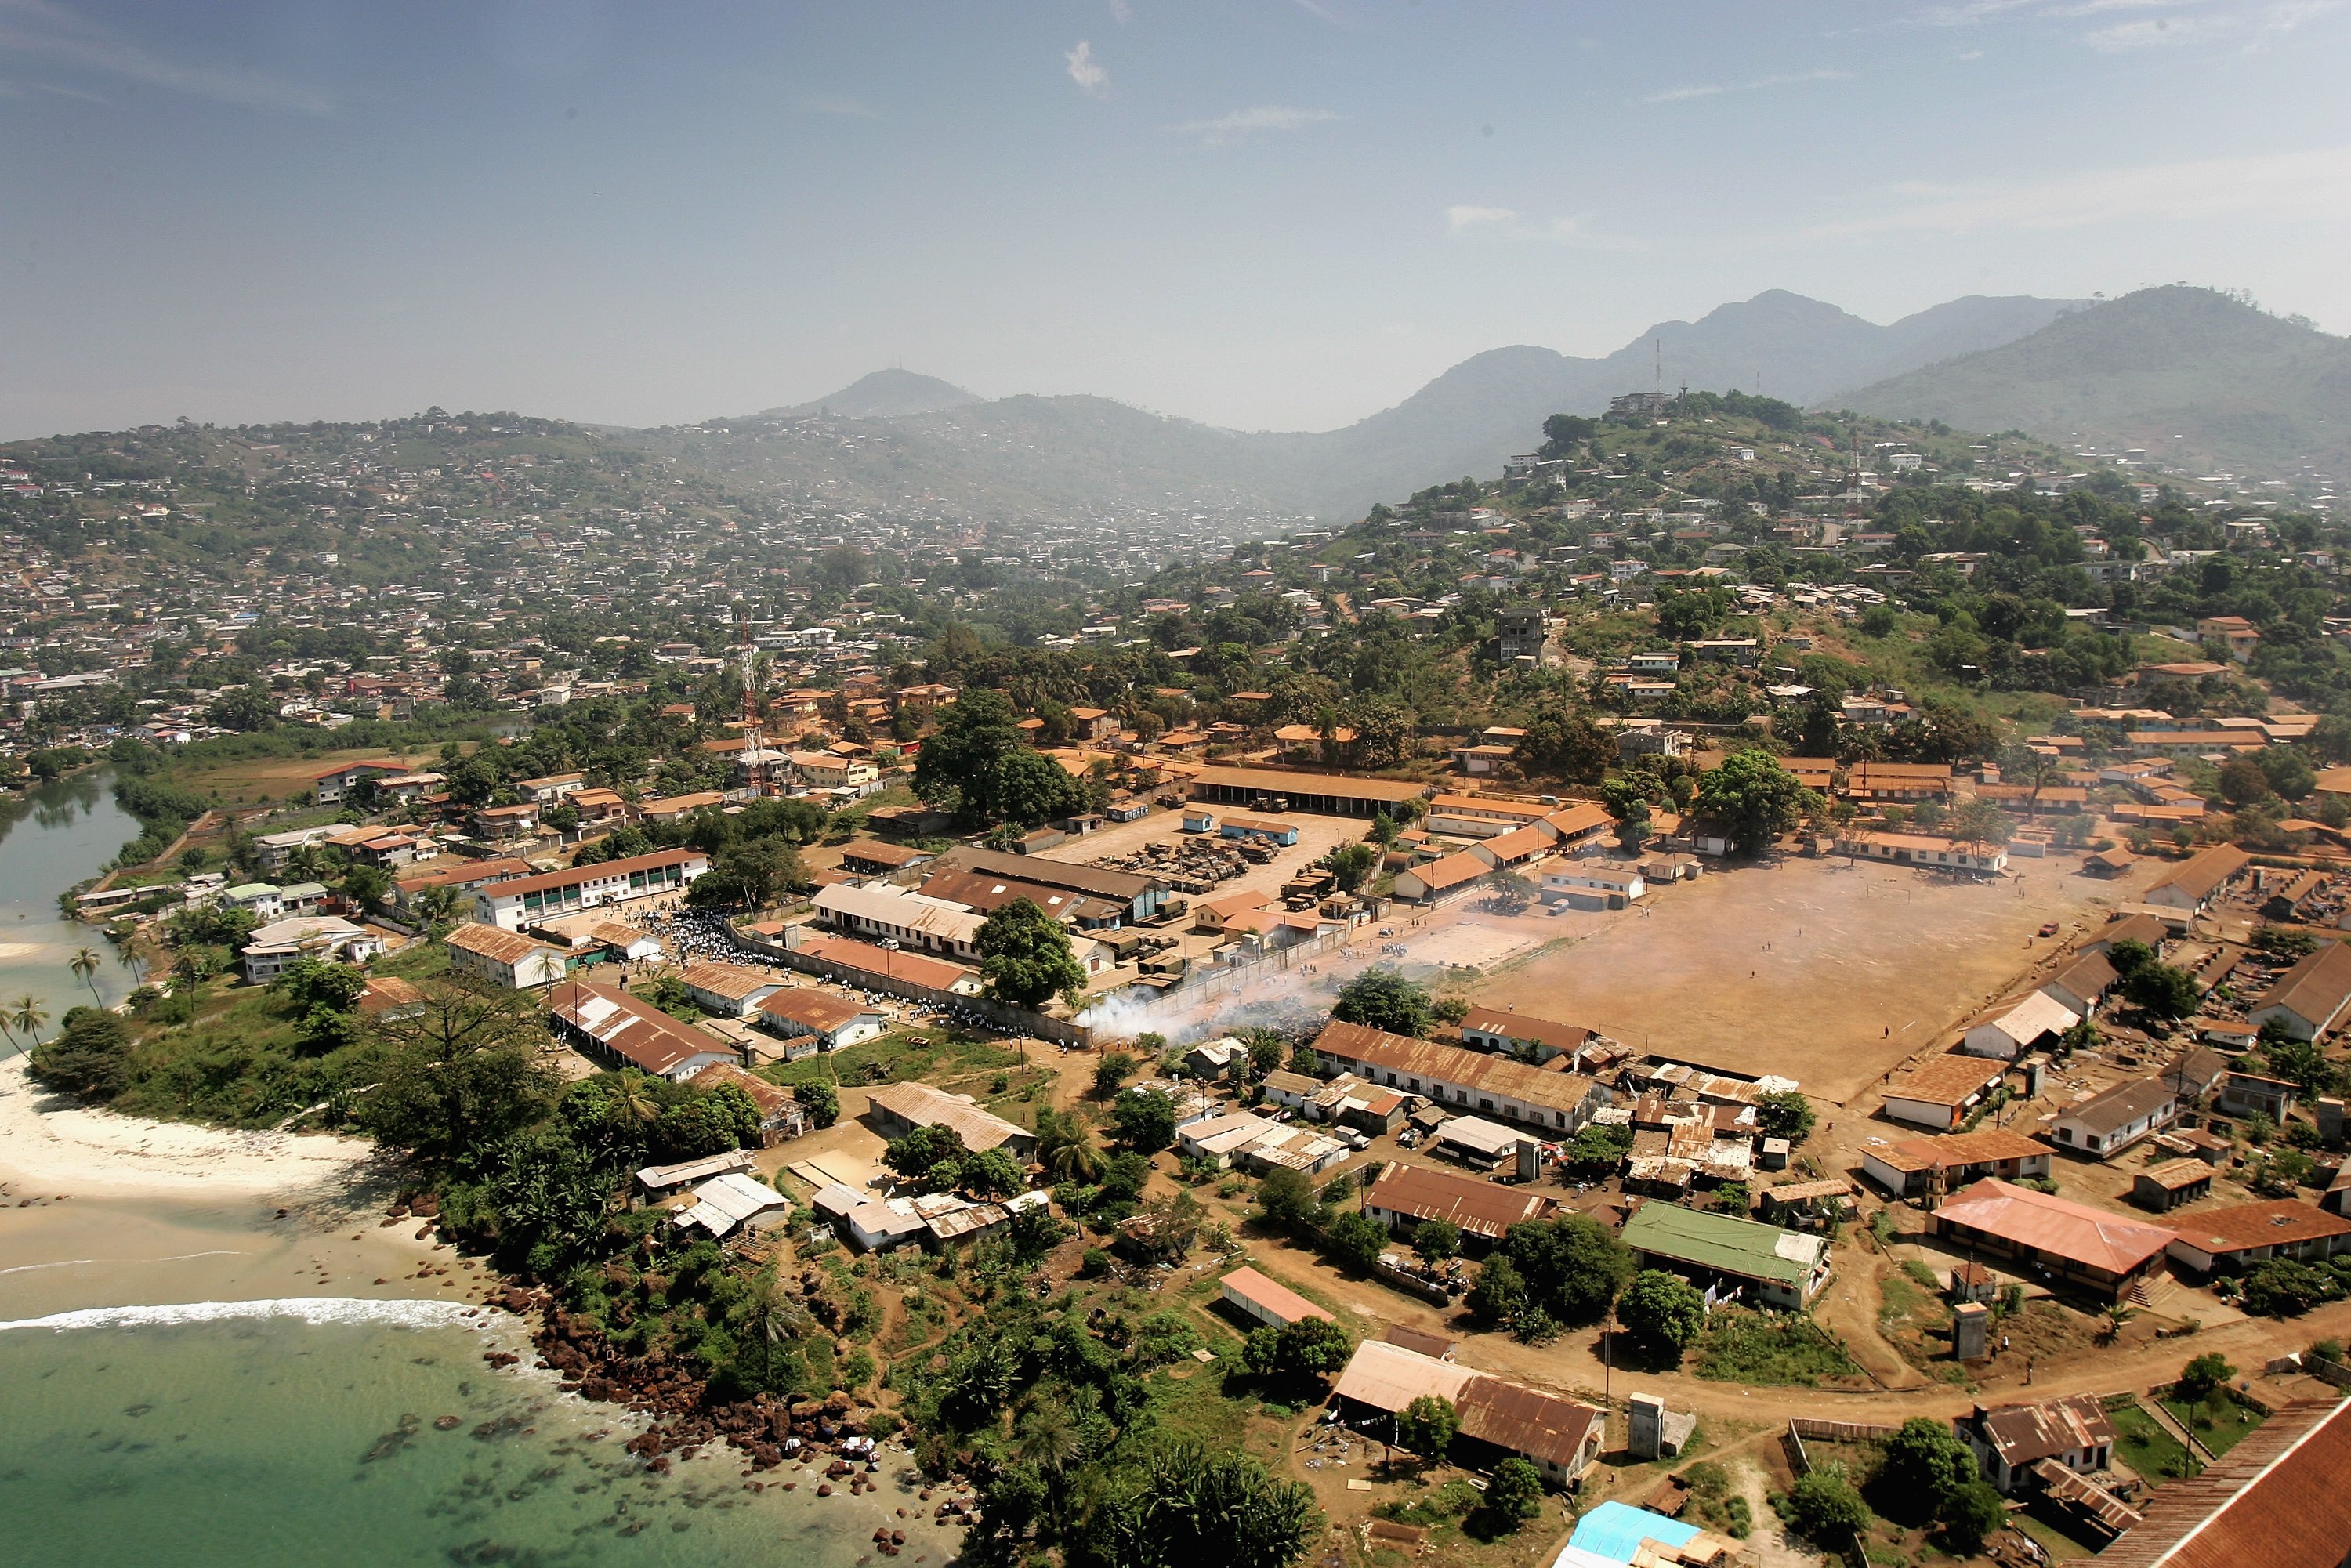 Sierra Leonians Survive In One Of The Worlds Poorest Countries